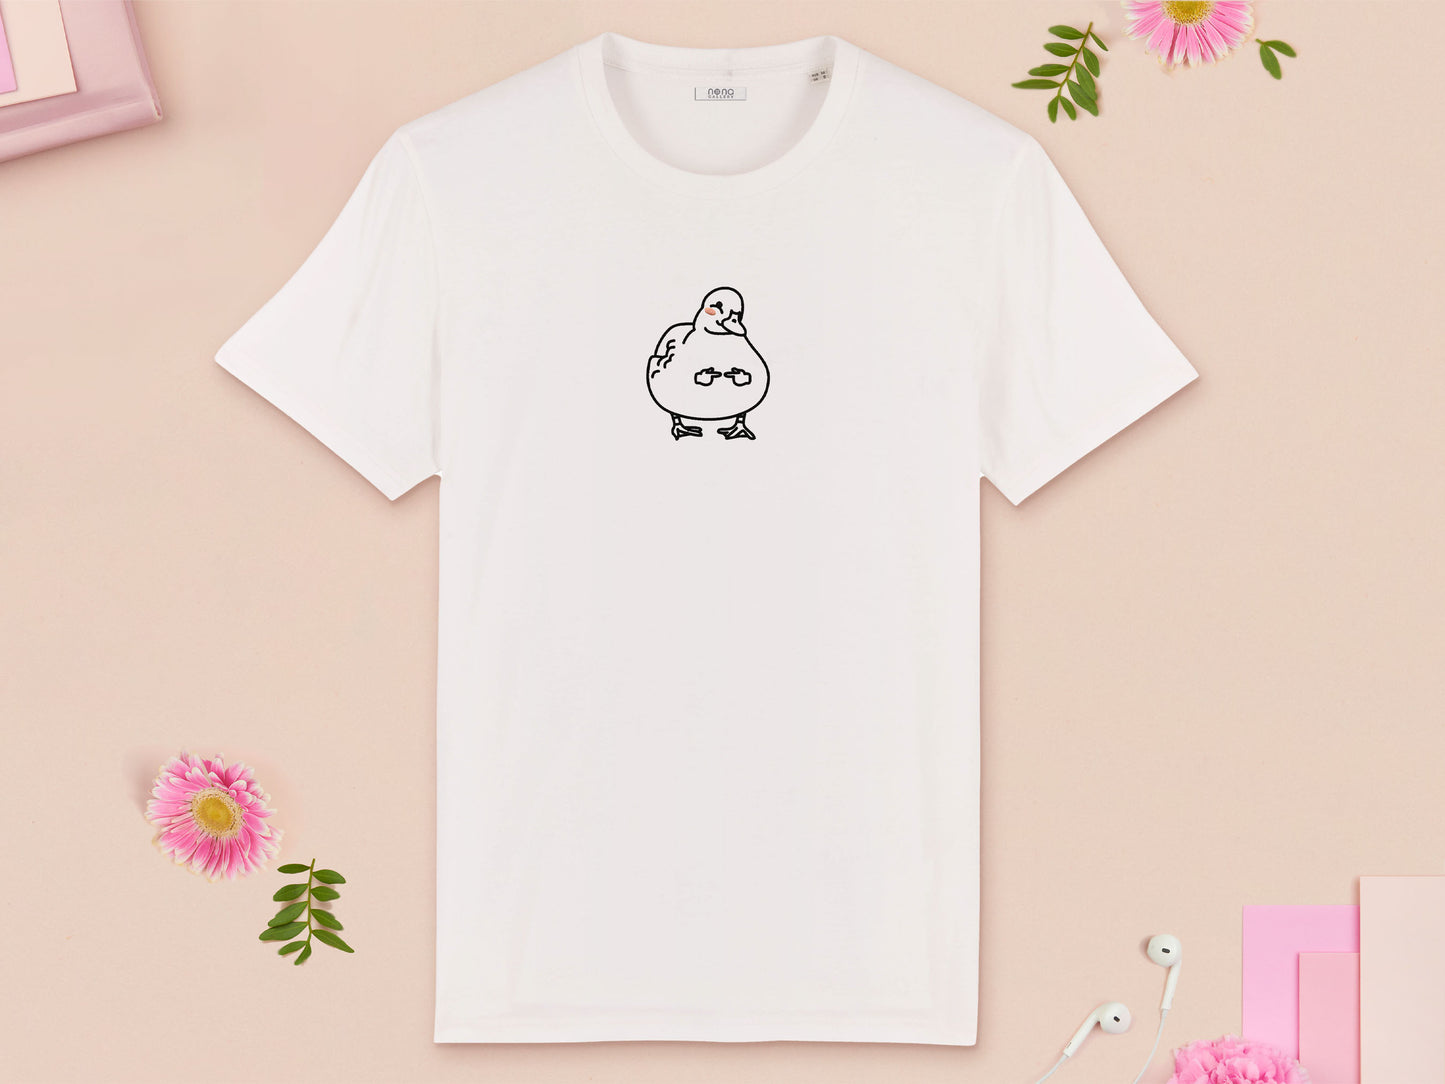 A white crew neck short sleeve t-shirt, with an embroidered black thread design of cute blushing duck with the for me finger hand emoji symbols